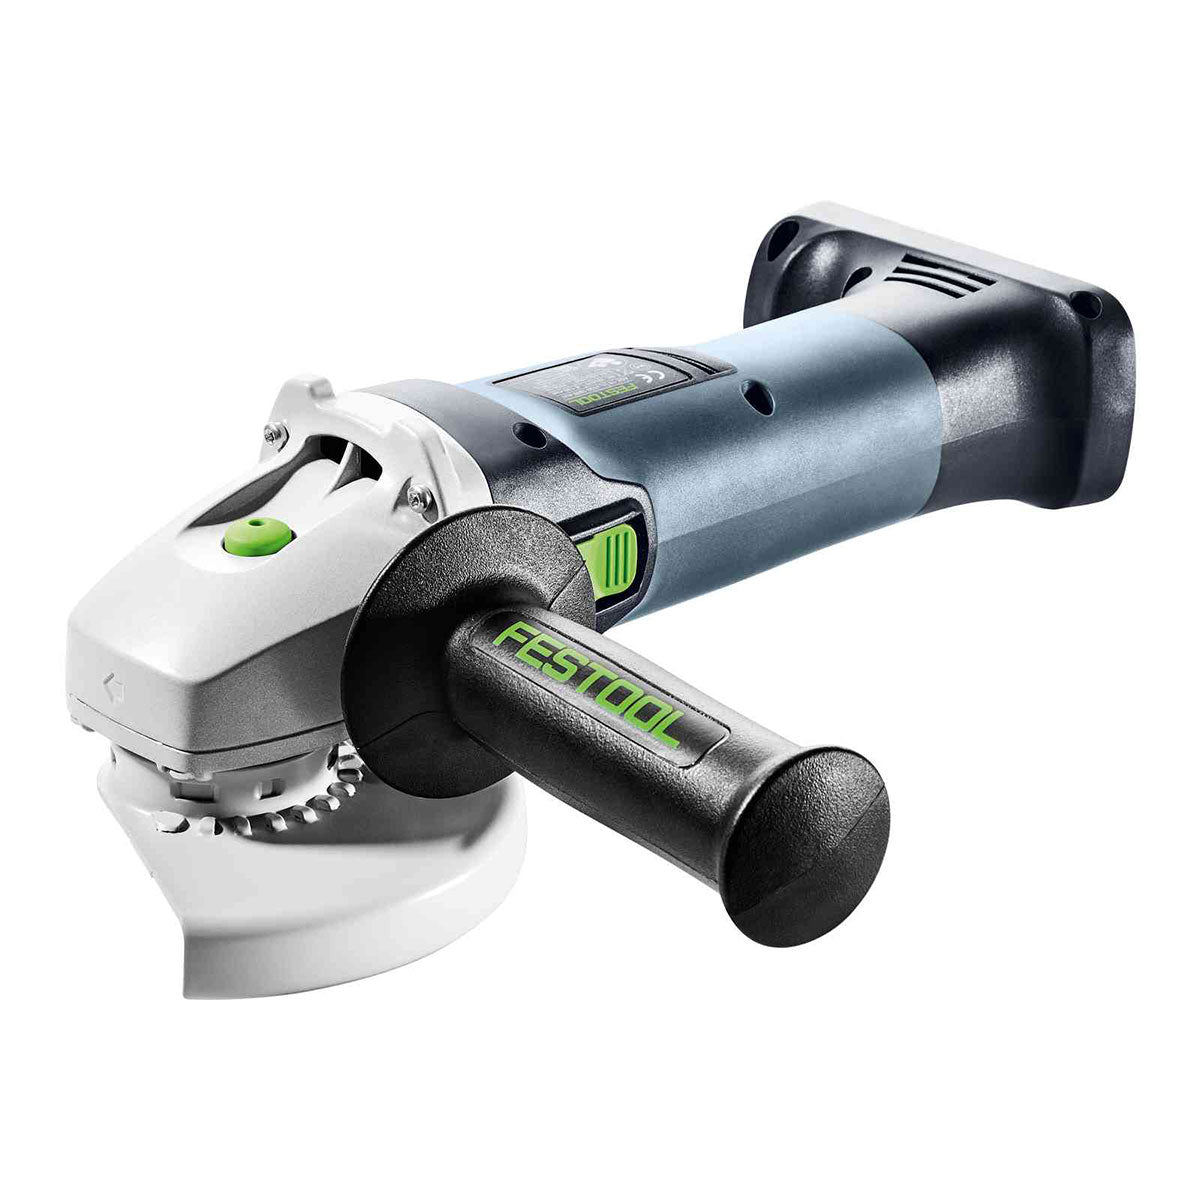 Festool 18V 3 Piece Brushless Power Tool Kit With 2 x 5.0Ah Battery, Rapid Charger 578029